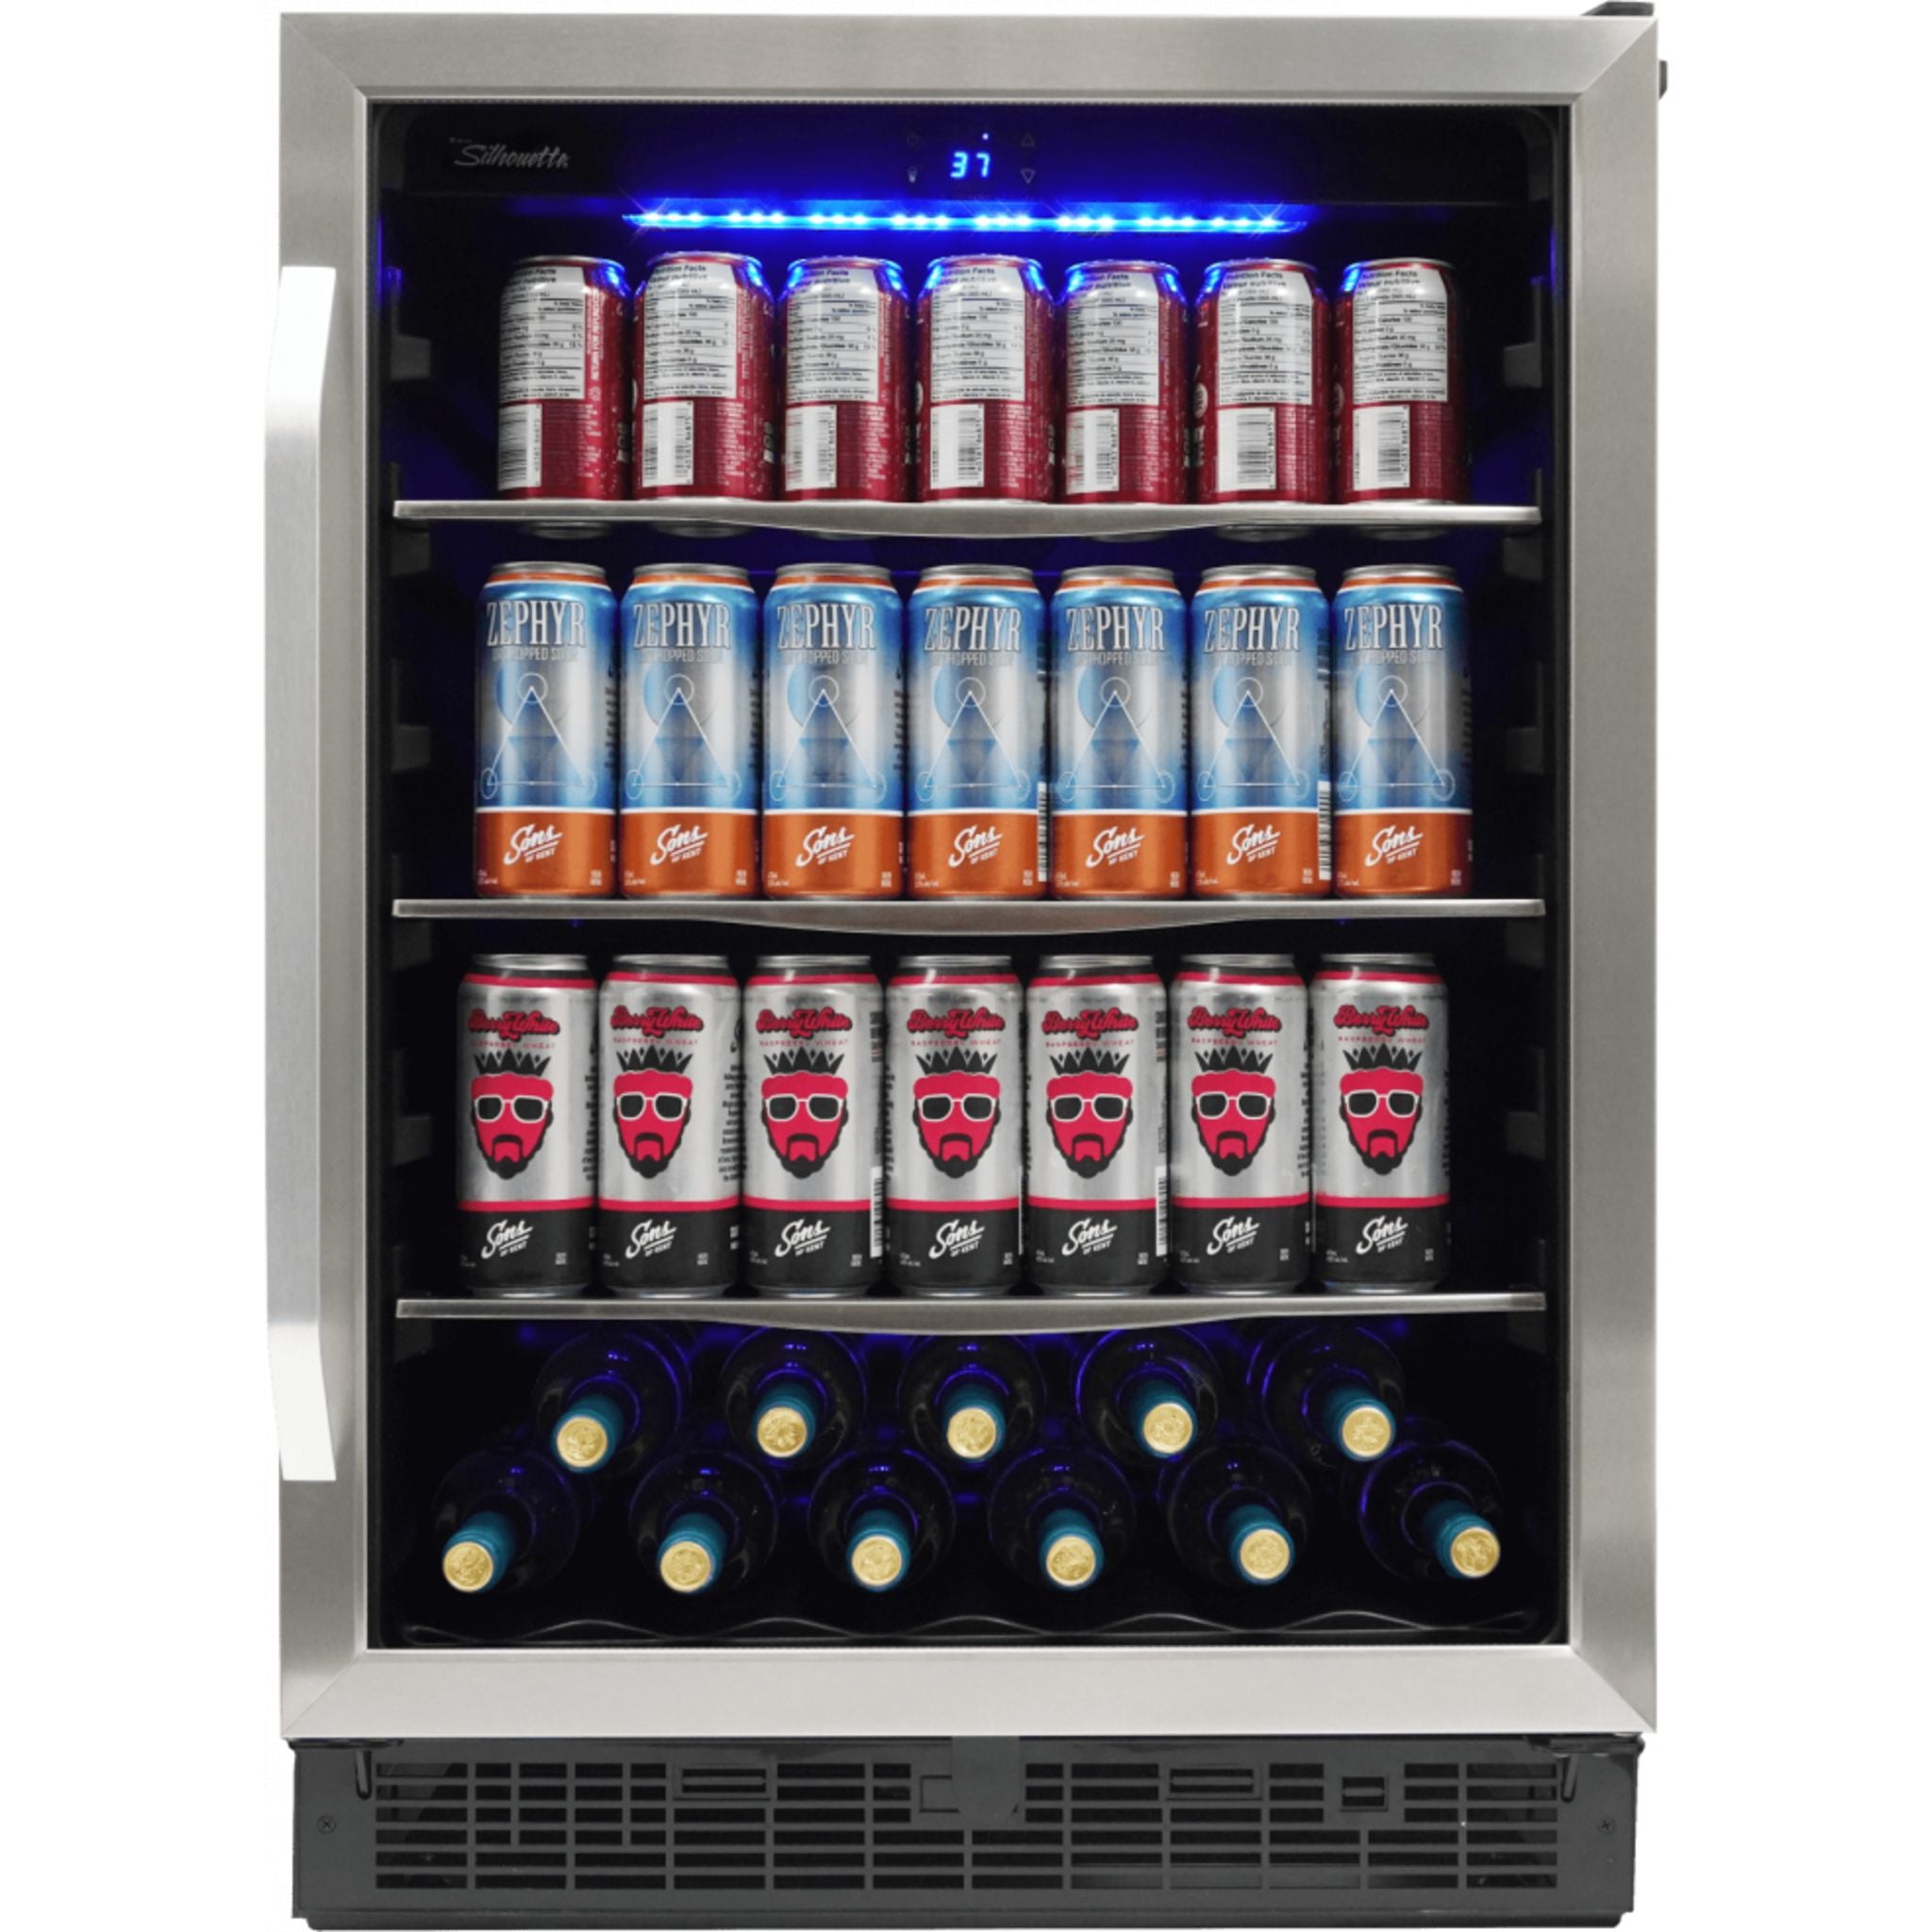 Danby, Danby-Silhouette Beverage Cooler (SBC057D1BSS) - Stainless Steel